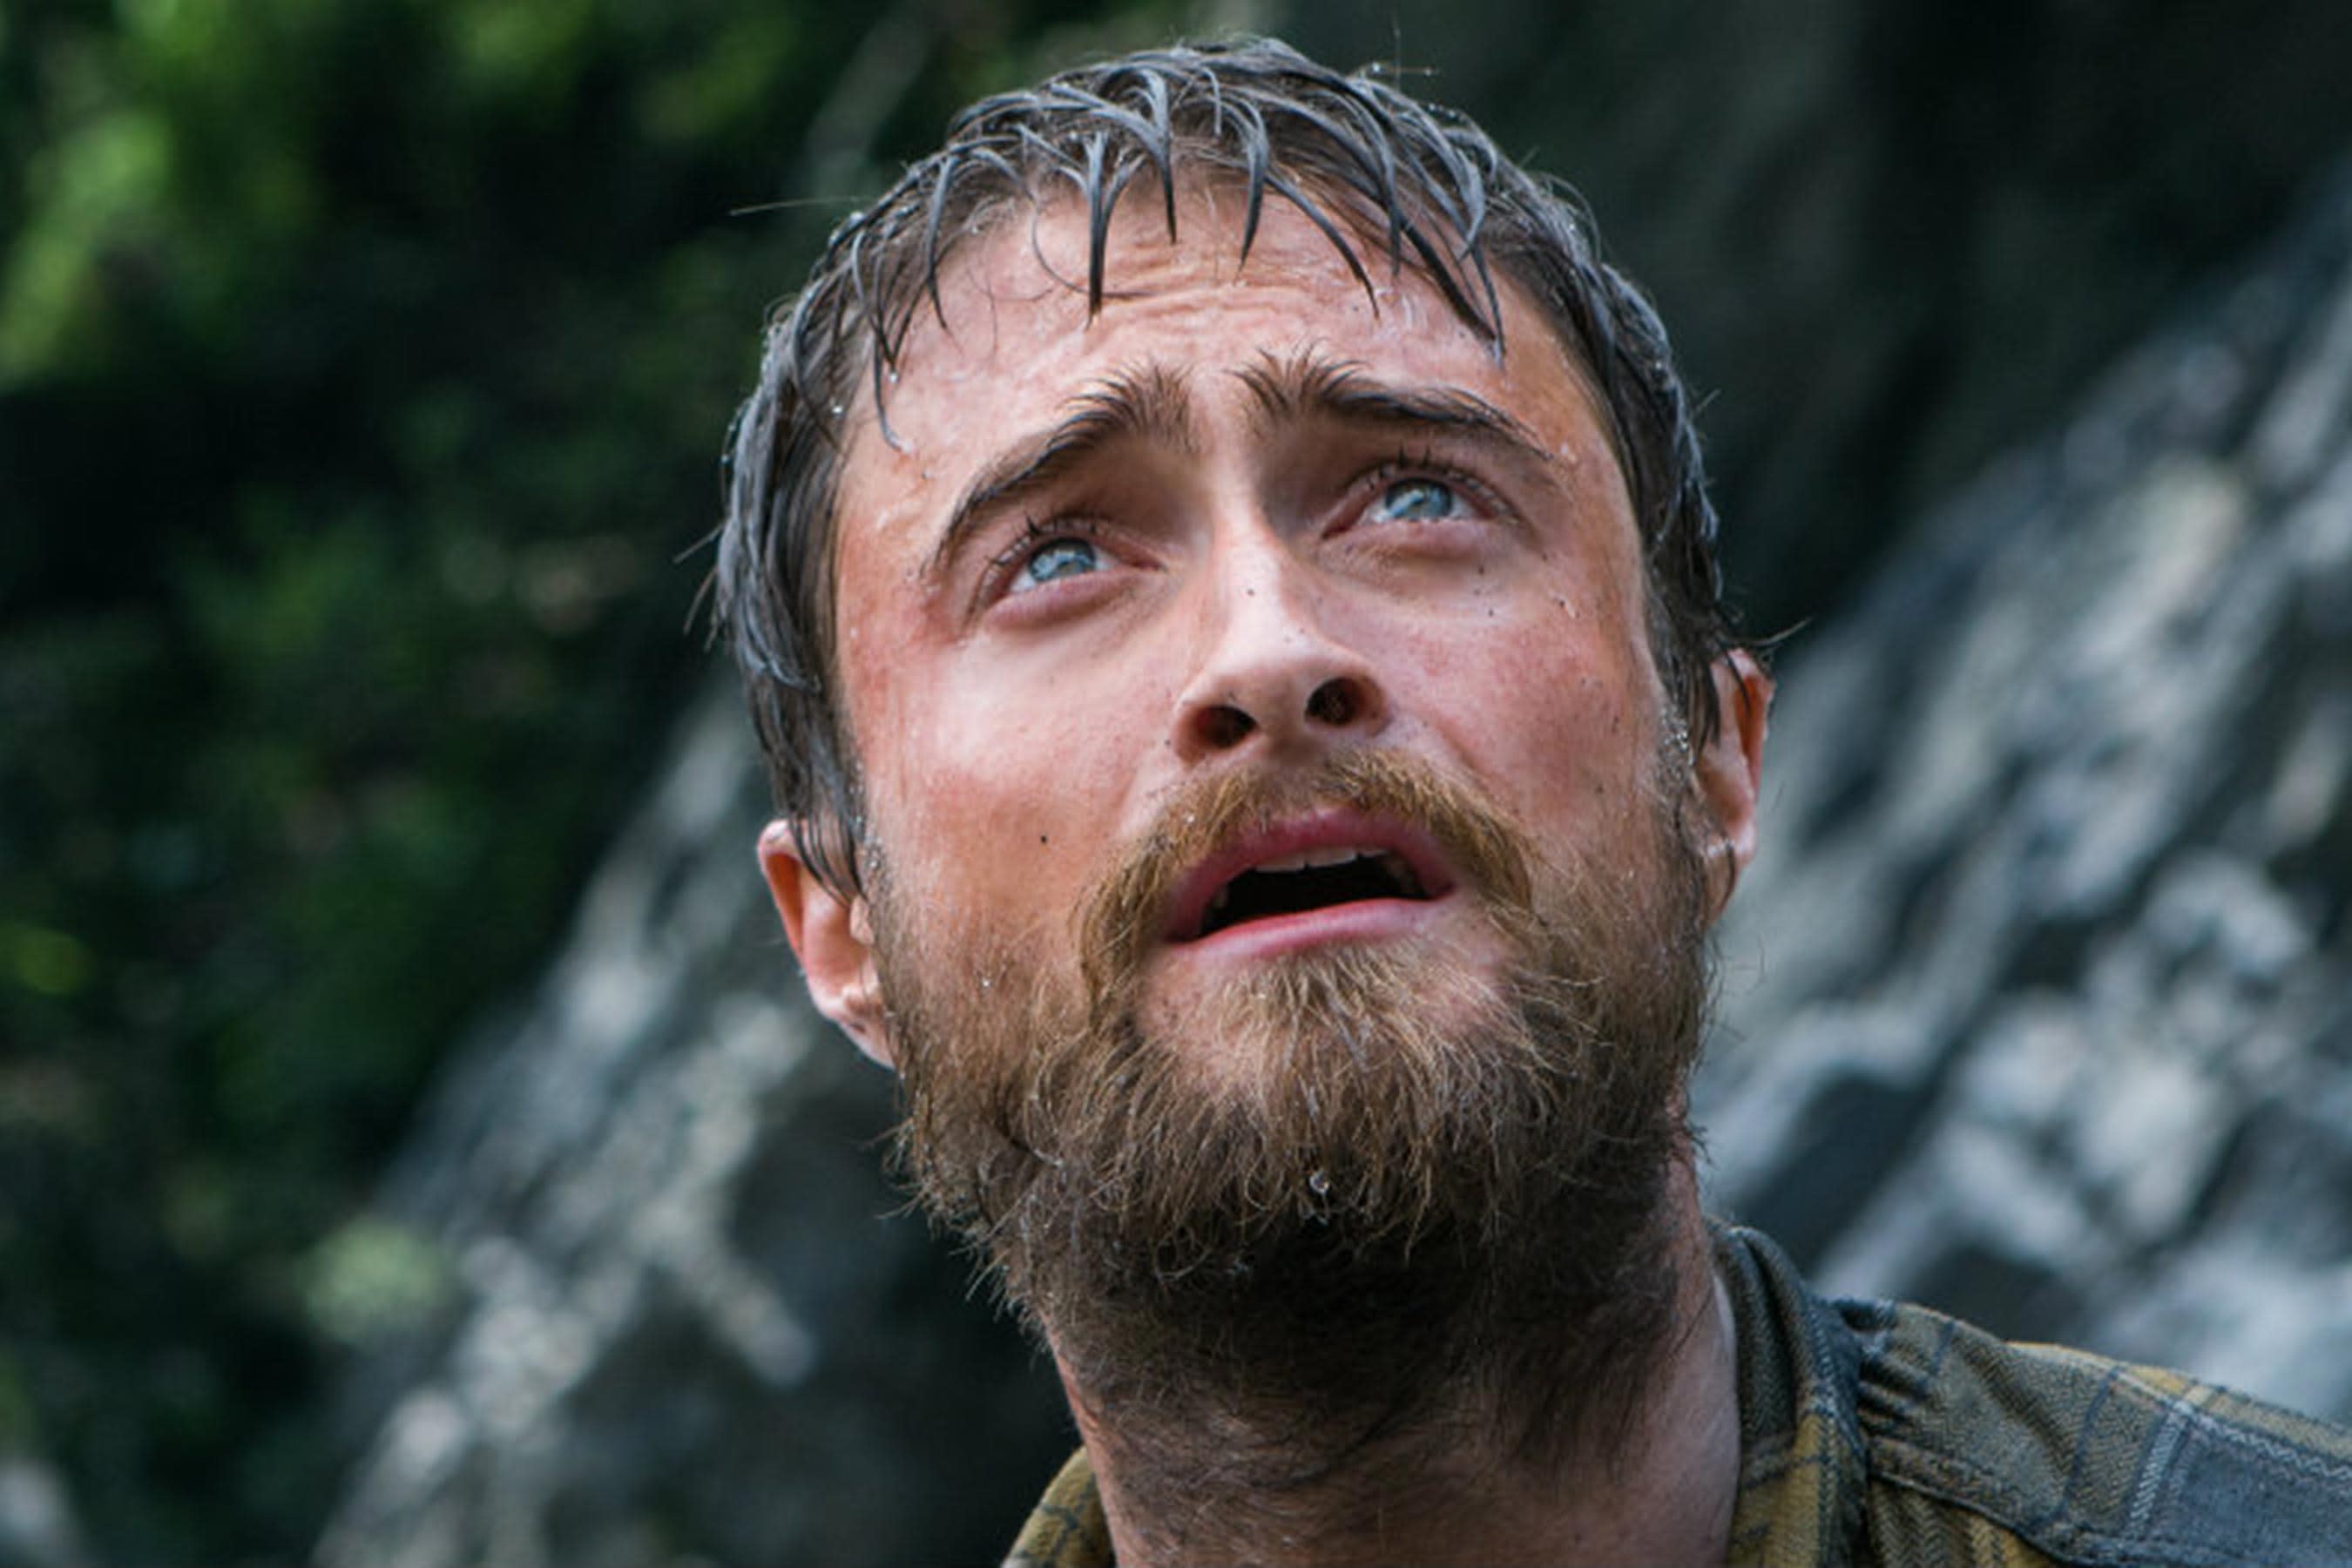 Daniel Radcliffe's survival skills are tested in new Jungle trailer